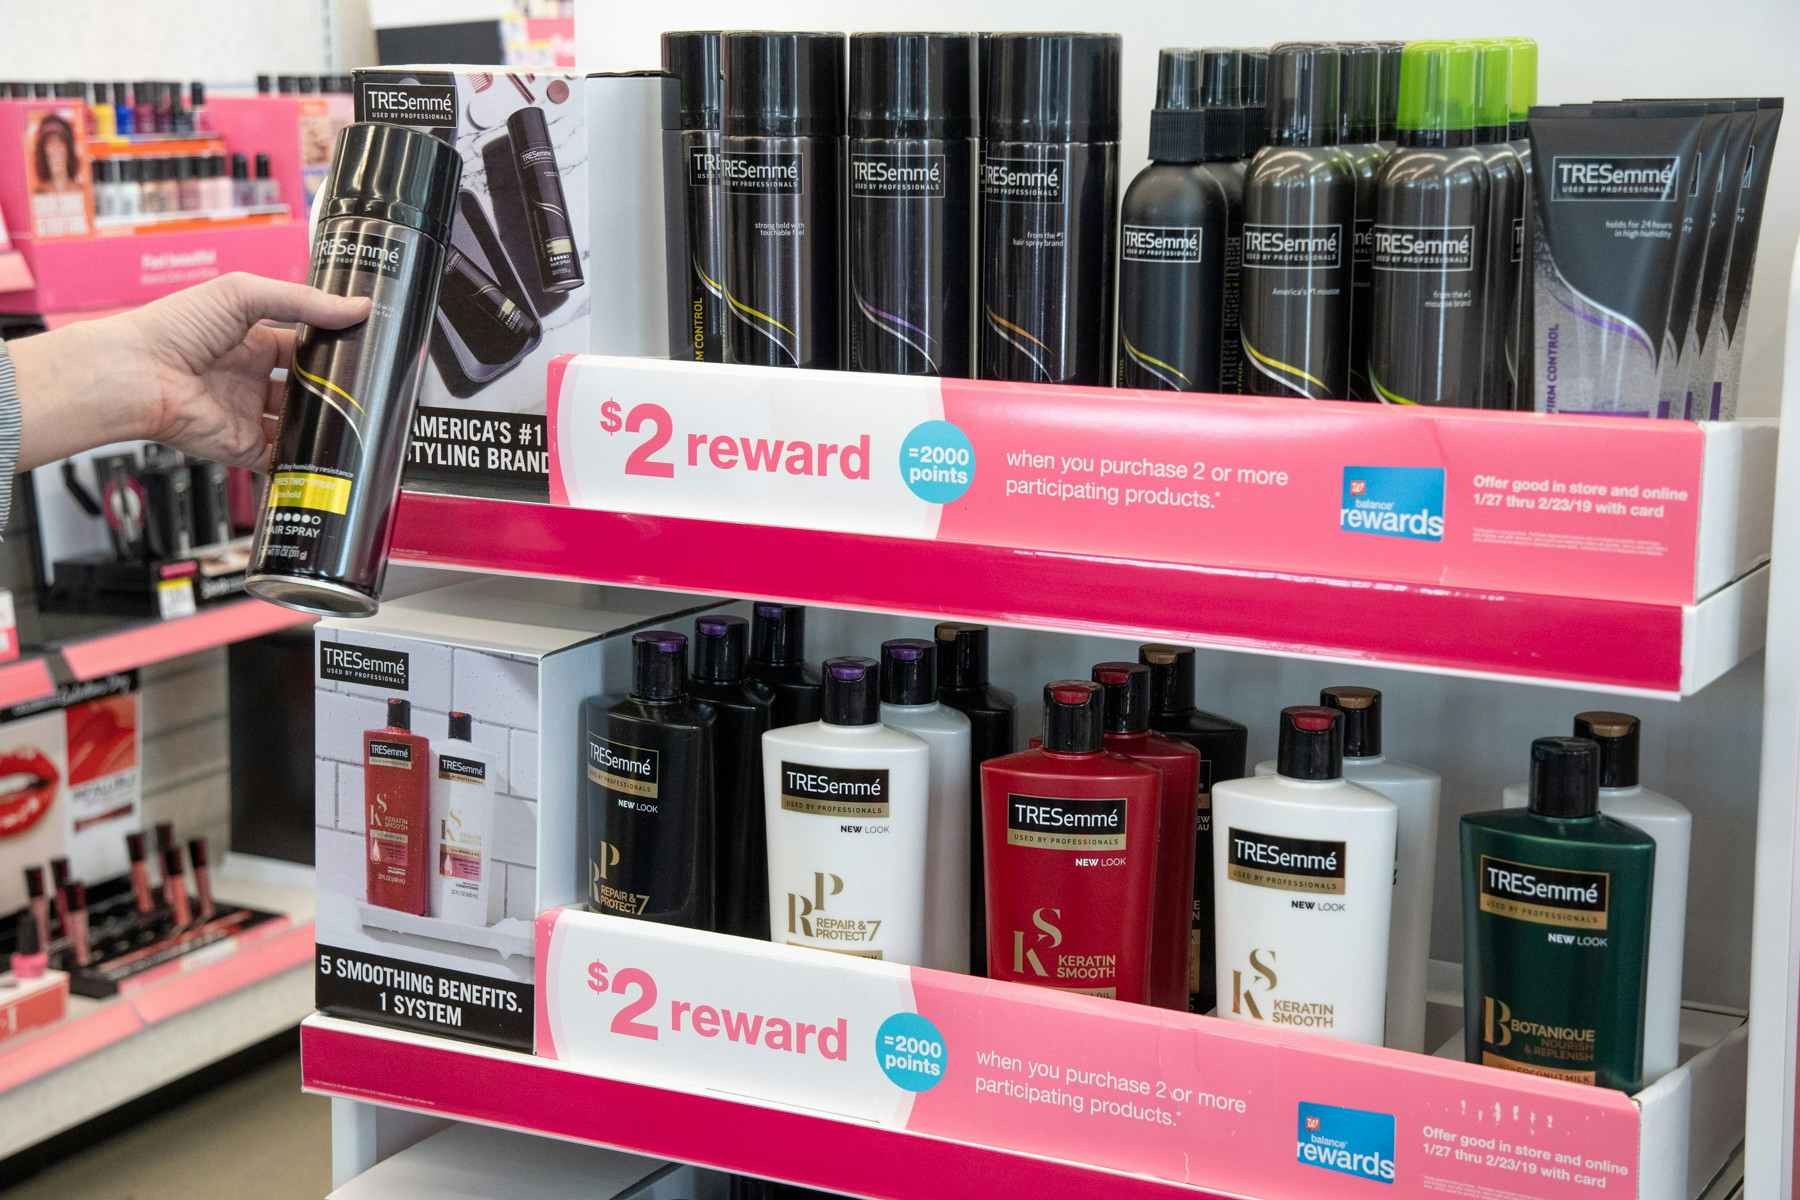 Don't forget to sign up for Balance Rewards to save all the money at Walgreens.